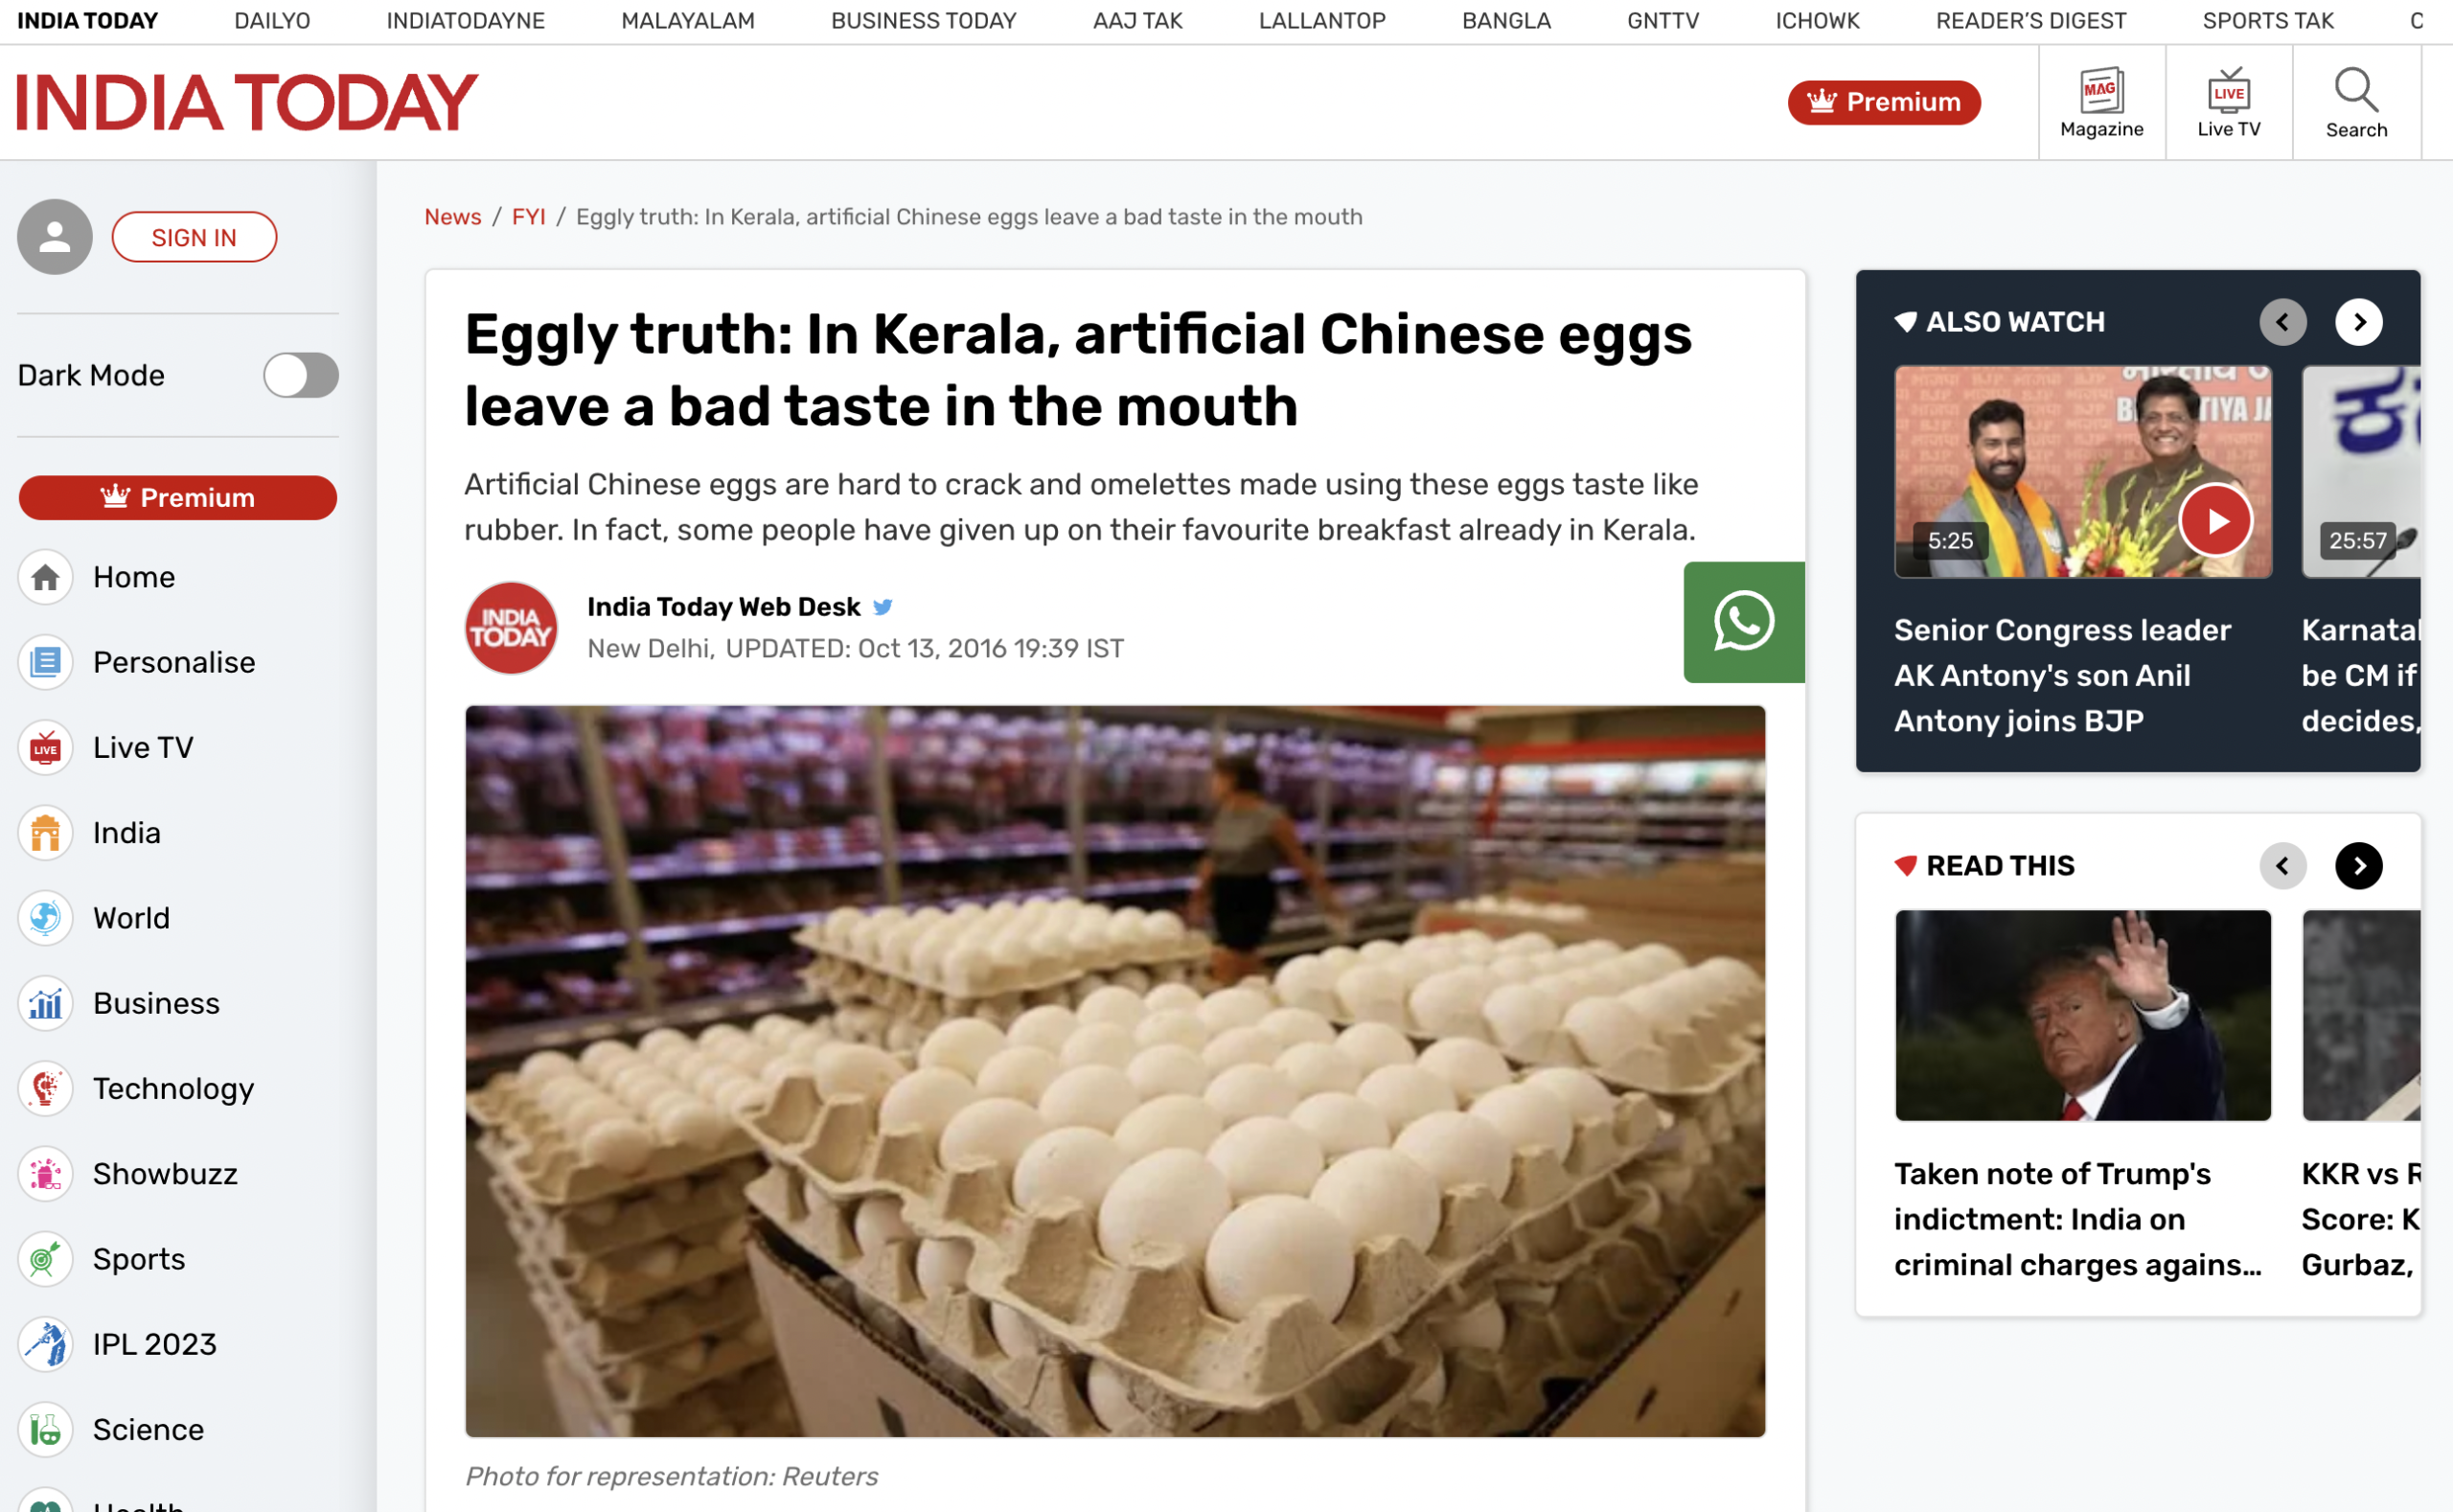 Eggly truth In Kerala artificial Chinese eggs leave a bad taste in the mouth